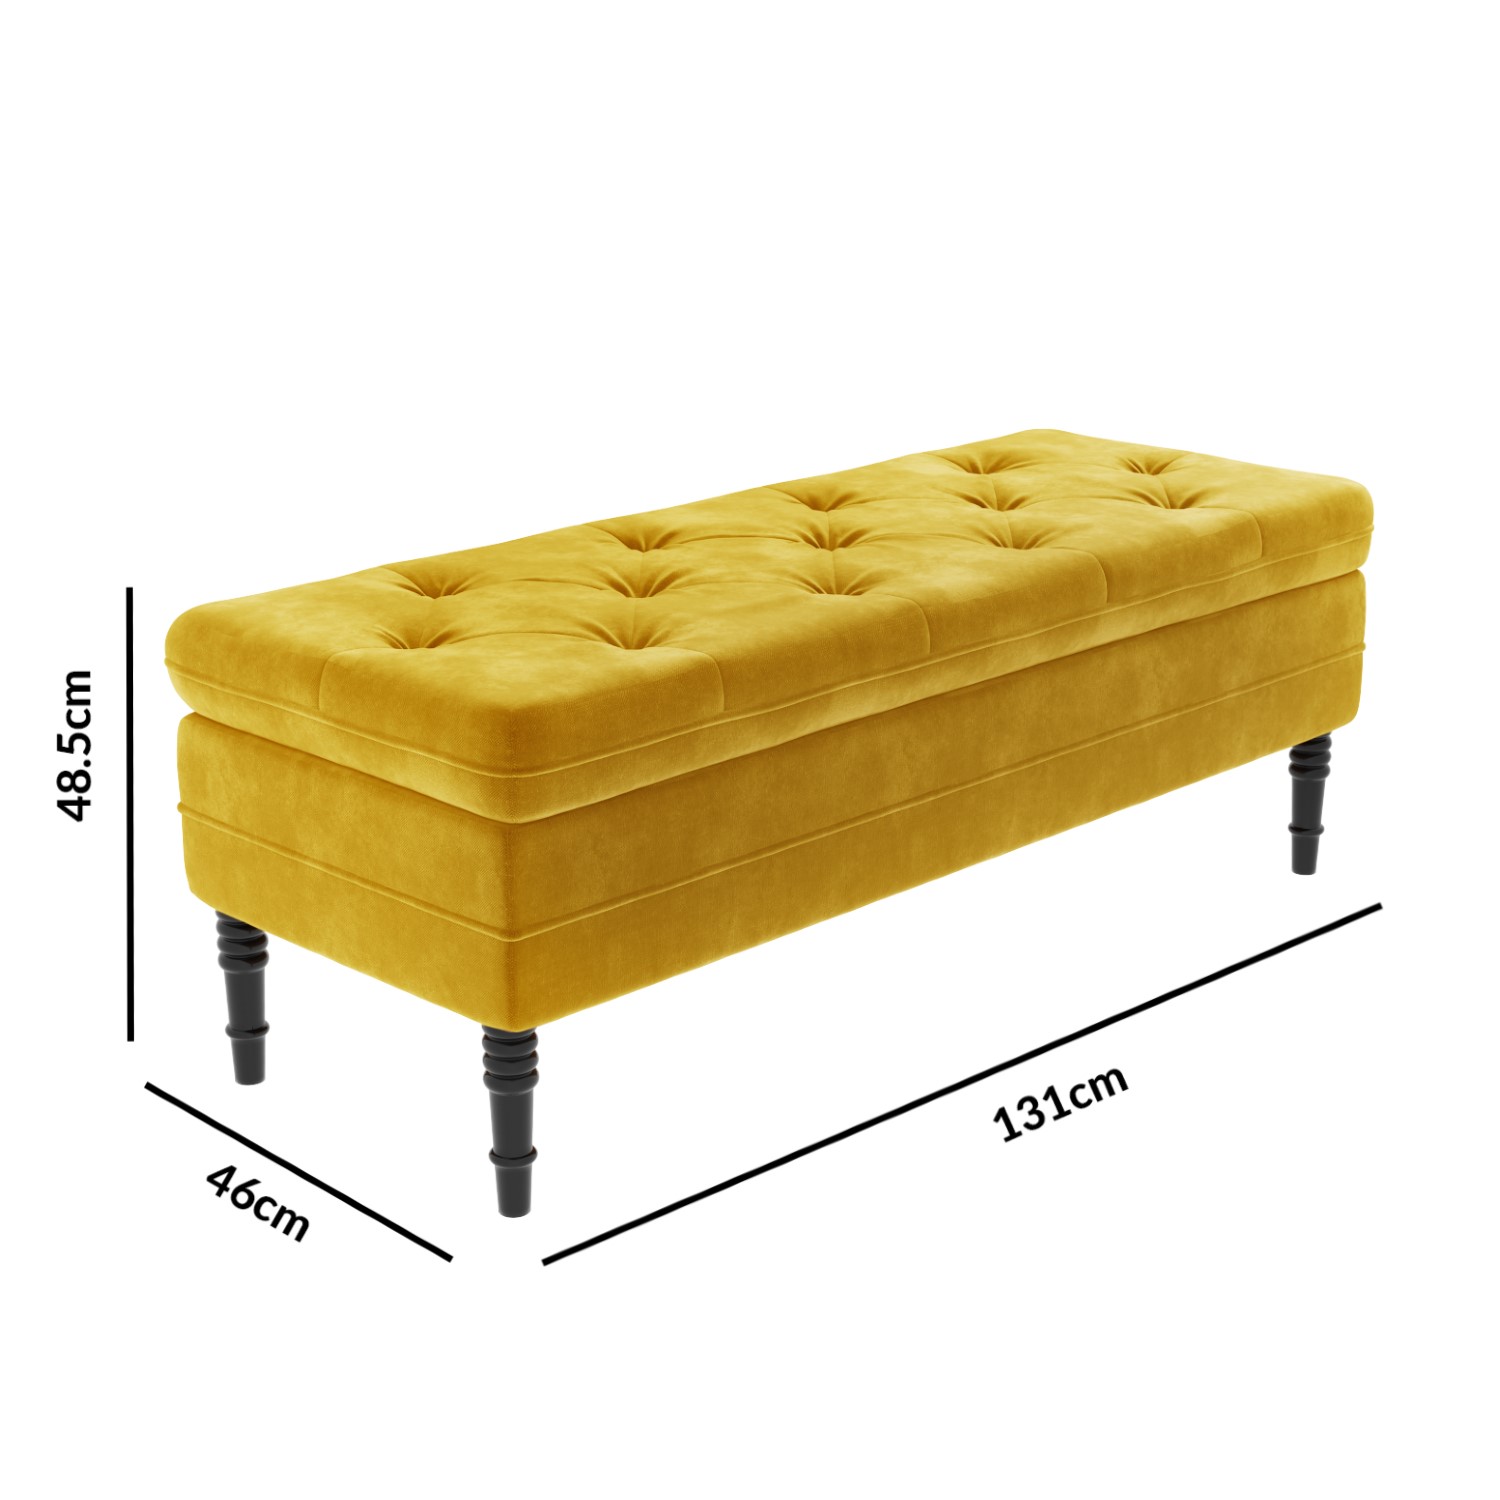 Safina End Of Bed Ottoman Storage Bench, Yellow Leather Ottoman